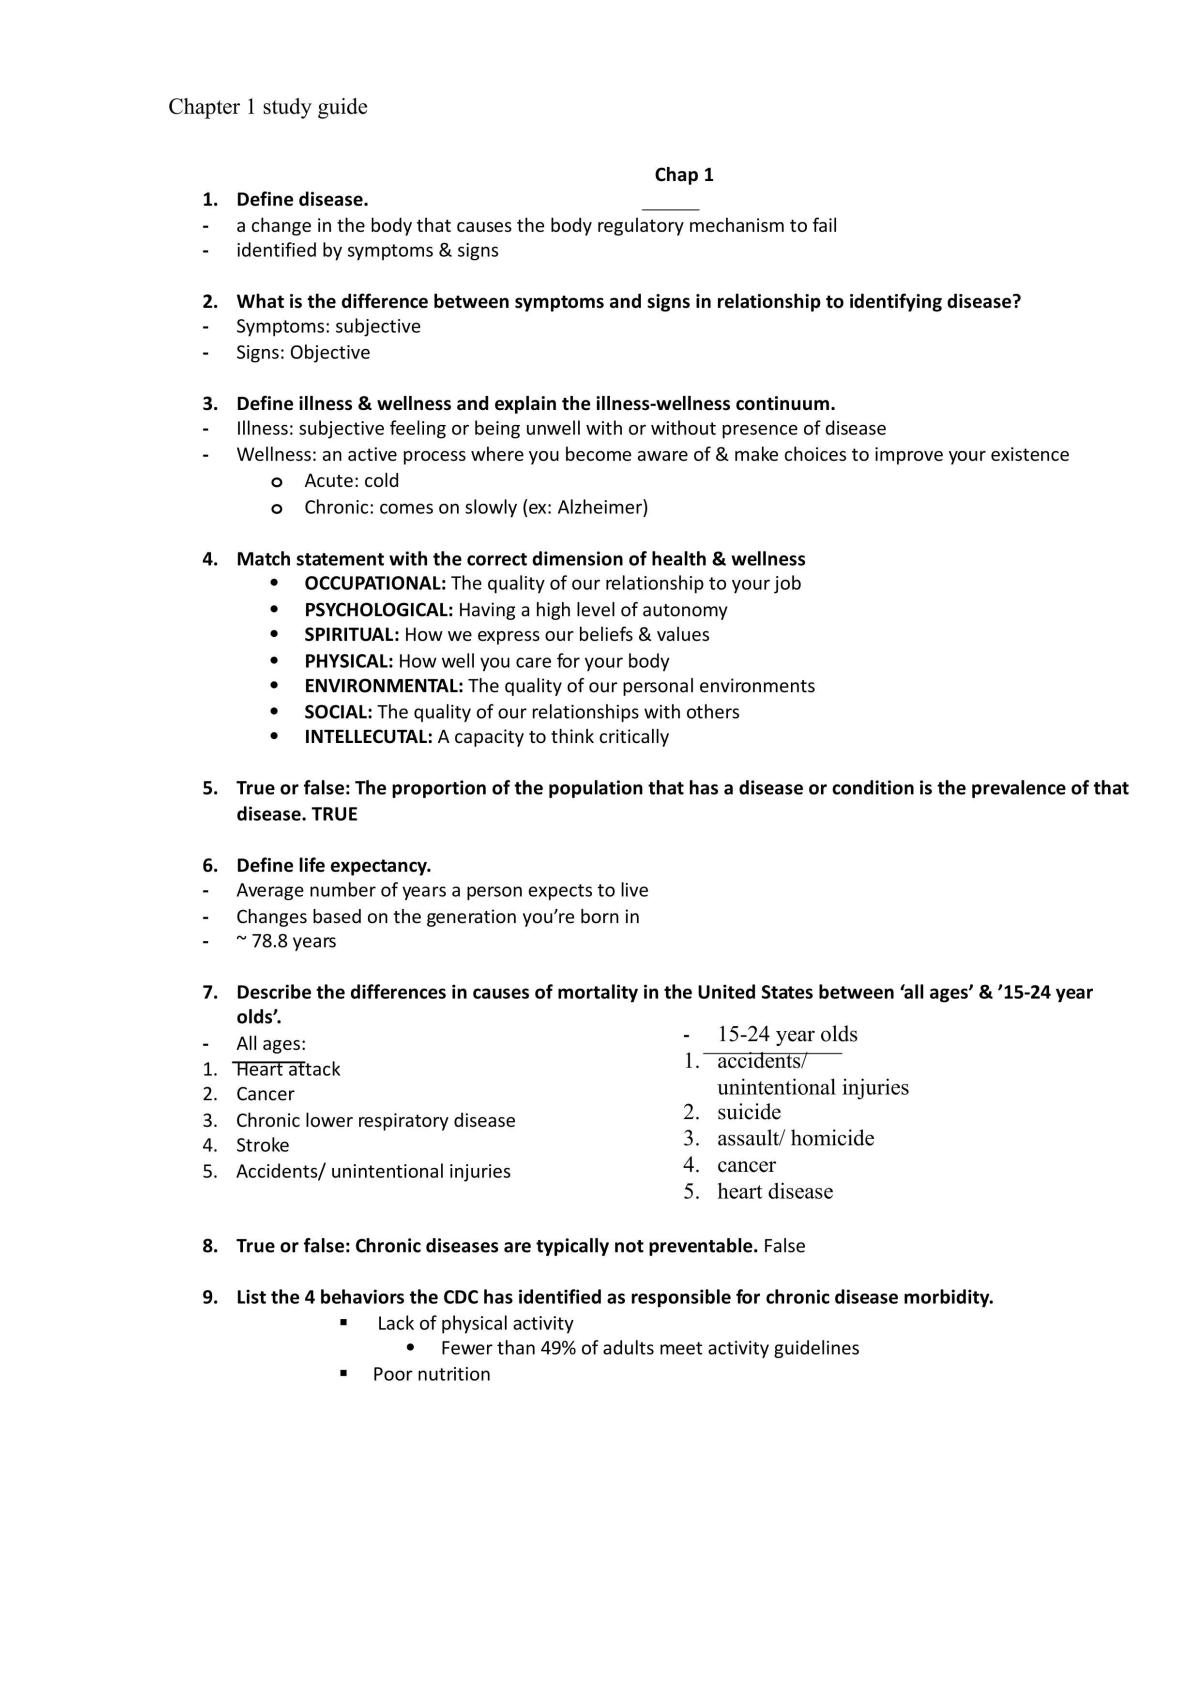 Exam 1 Study Guide BBH 119 - Behavior, Health, and Disease picture